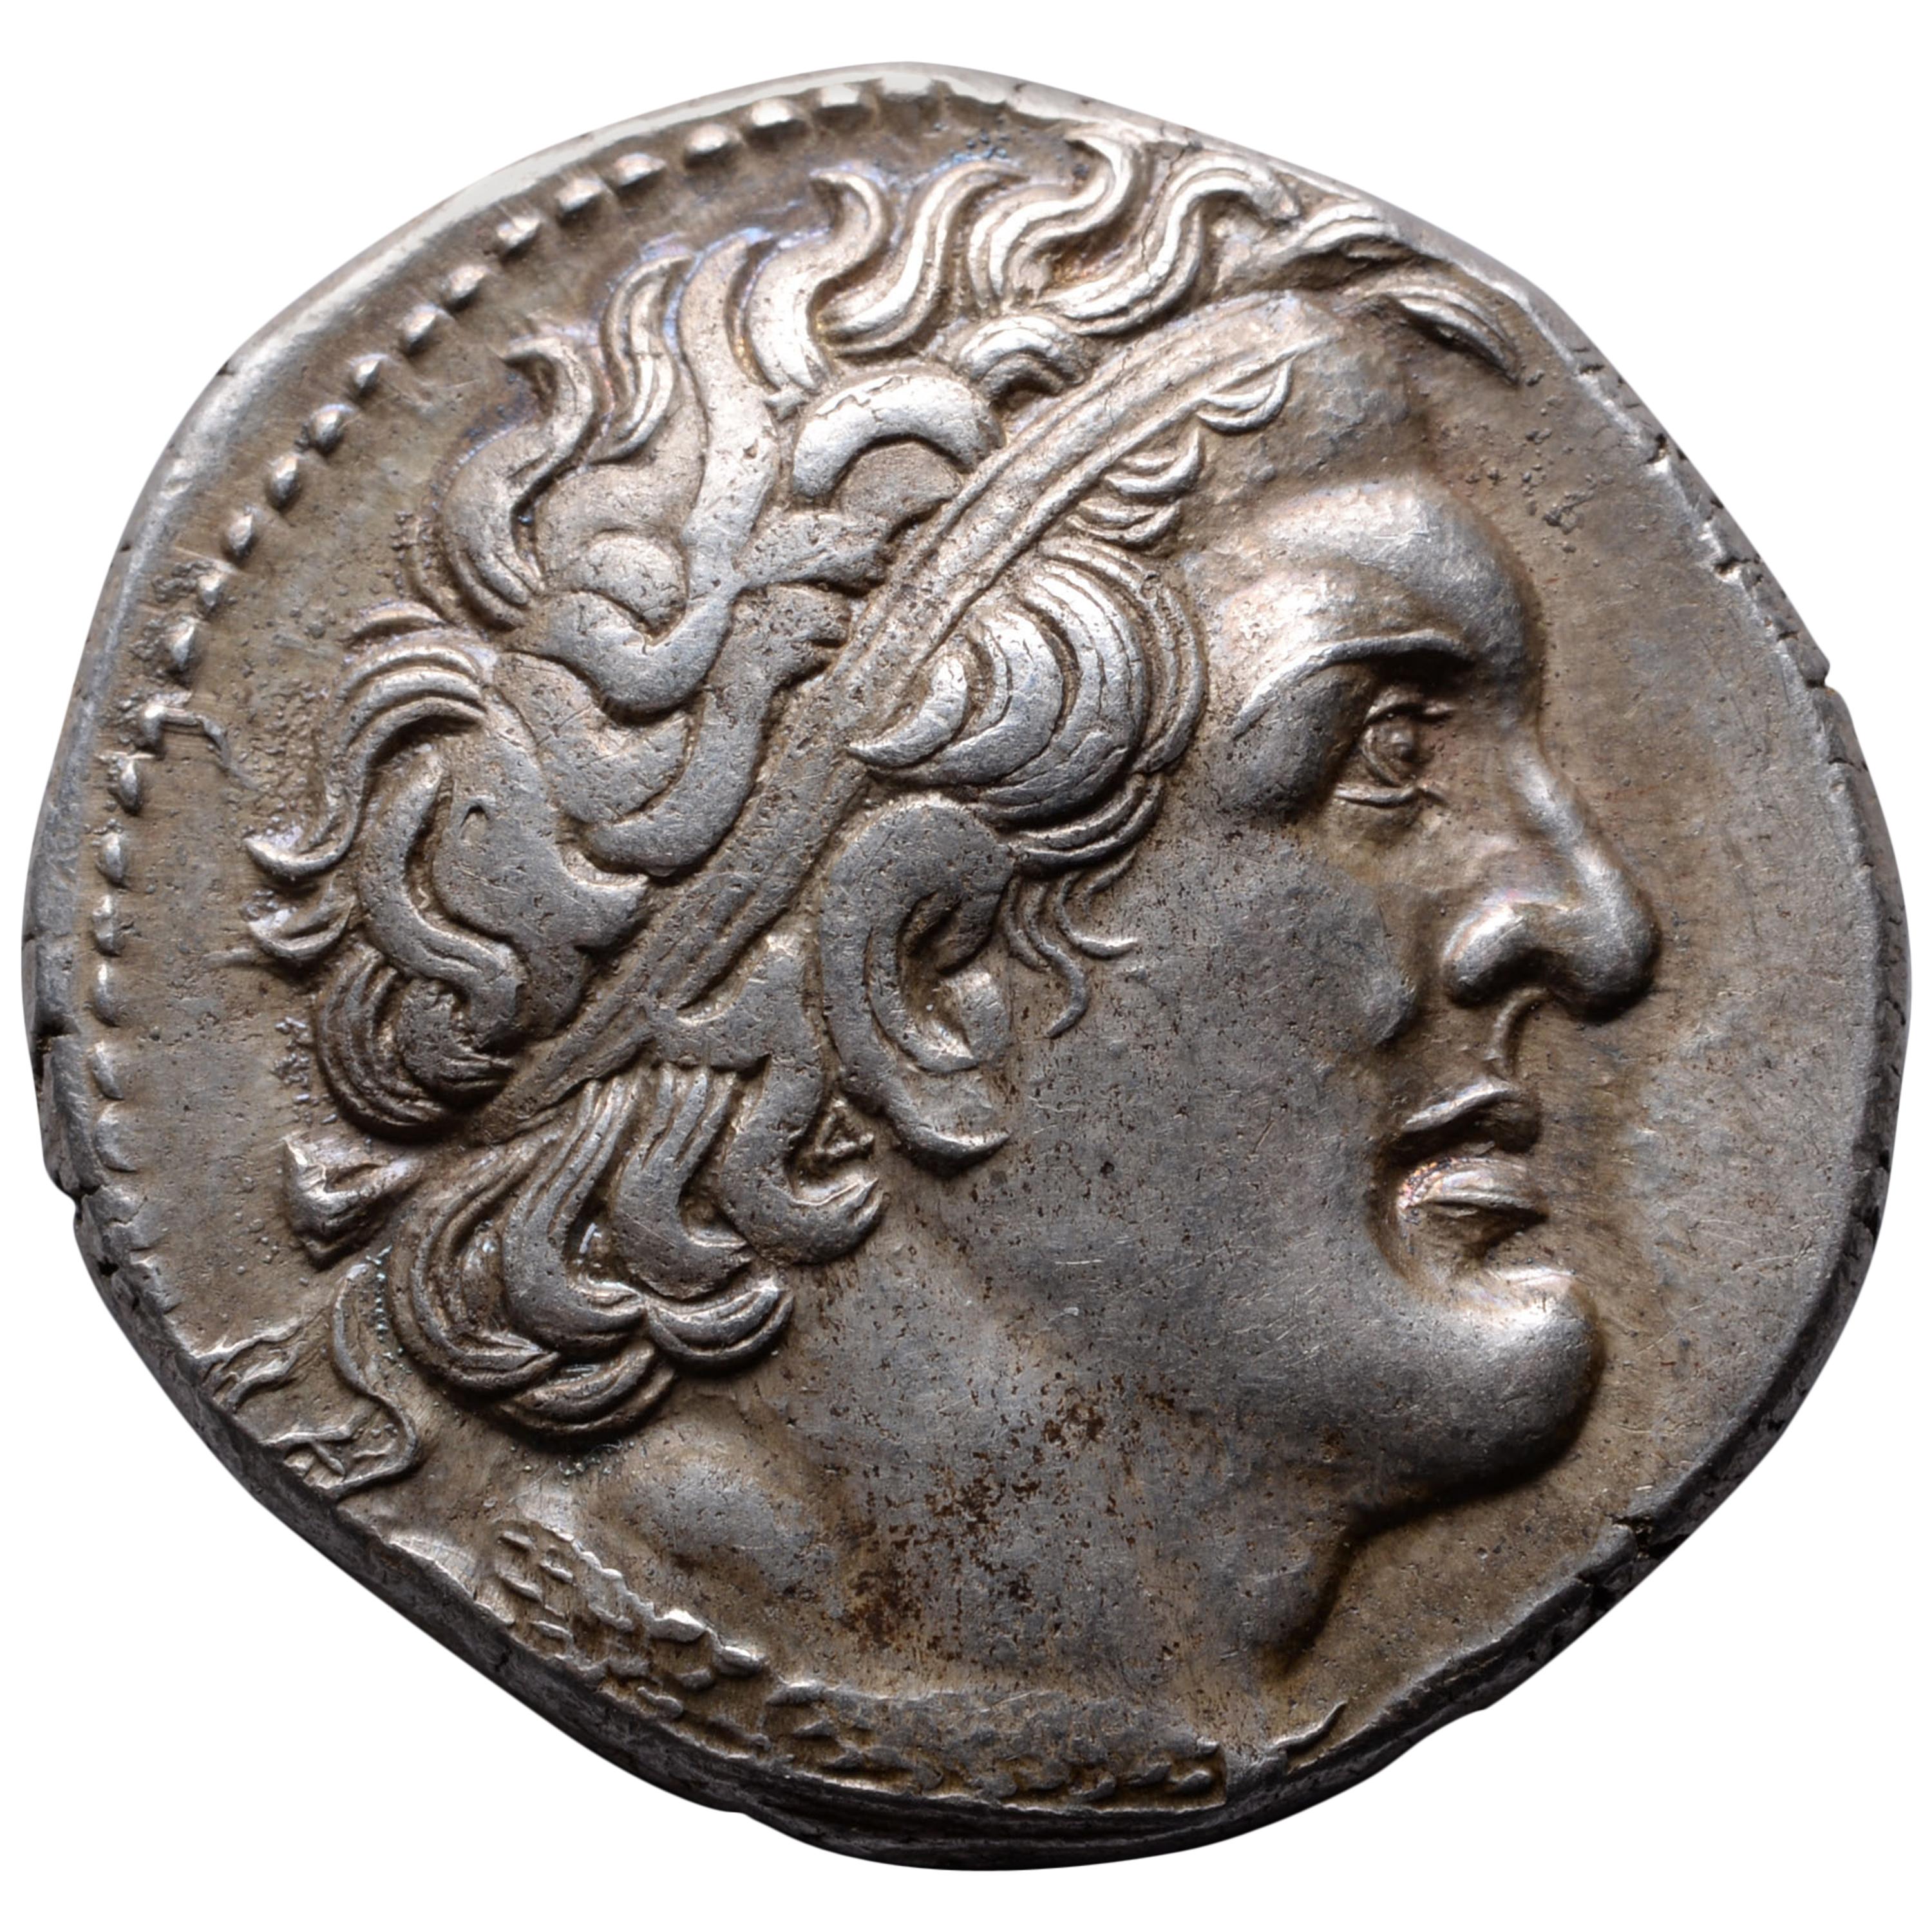 Ancient Greek Silver Tetradrachm Coin of King Ptolemy I, 300 BC